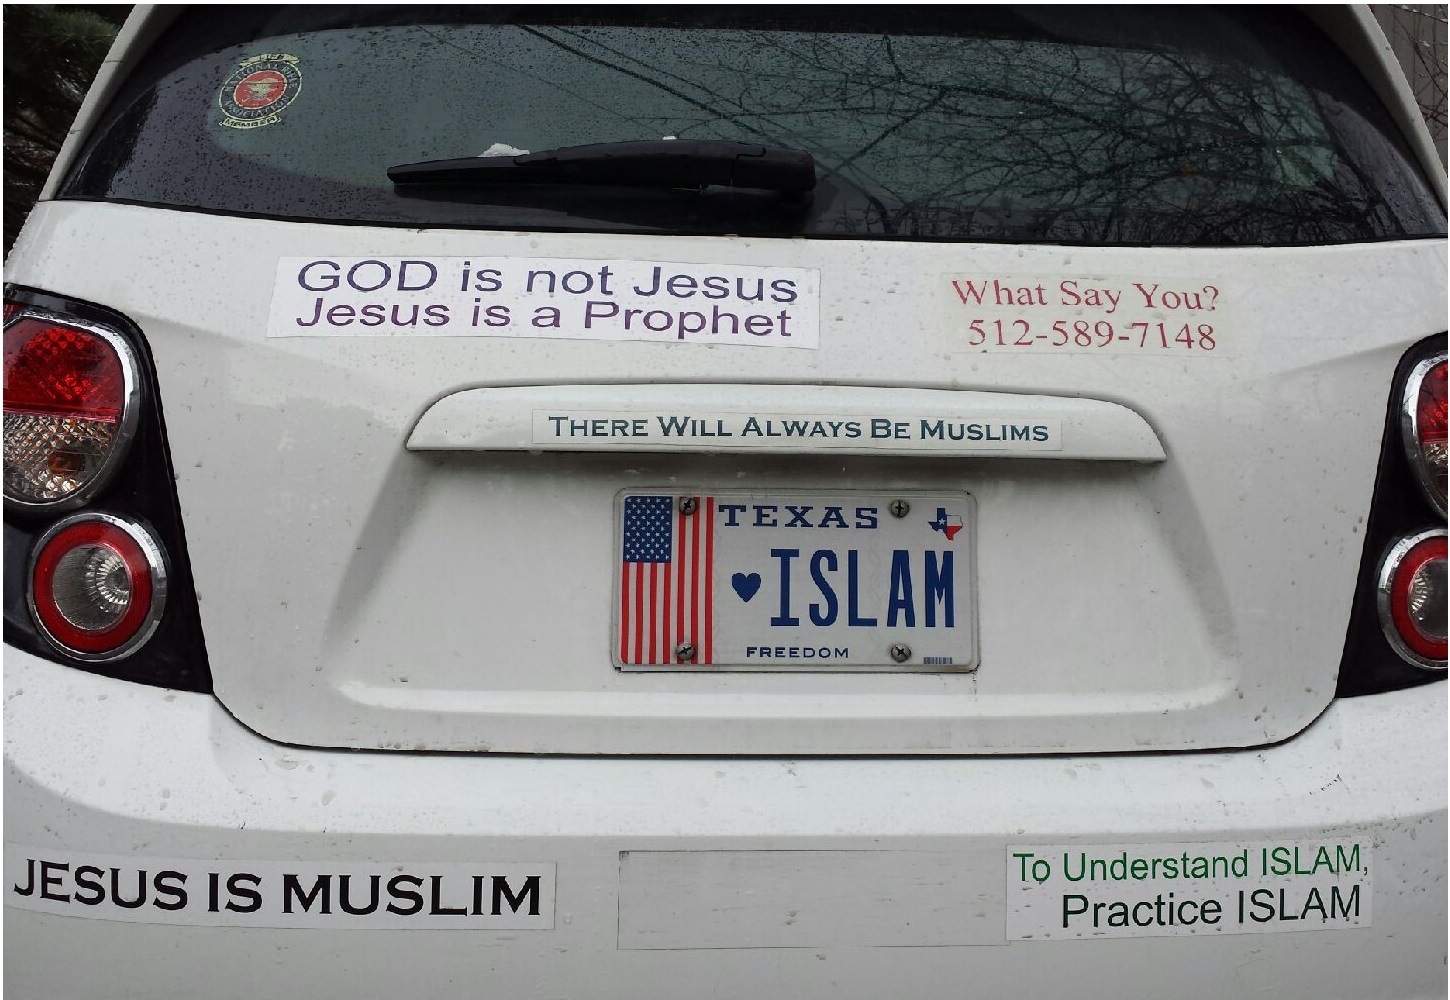 God is not Jesus, Jesus is a Prophet; What say you 512-589-7148; There will Always Be Muslims; Jesus is Muslim; To understand Islam, practice Islam.